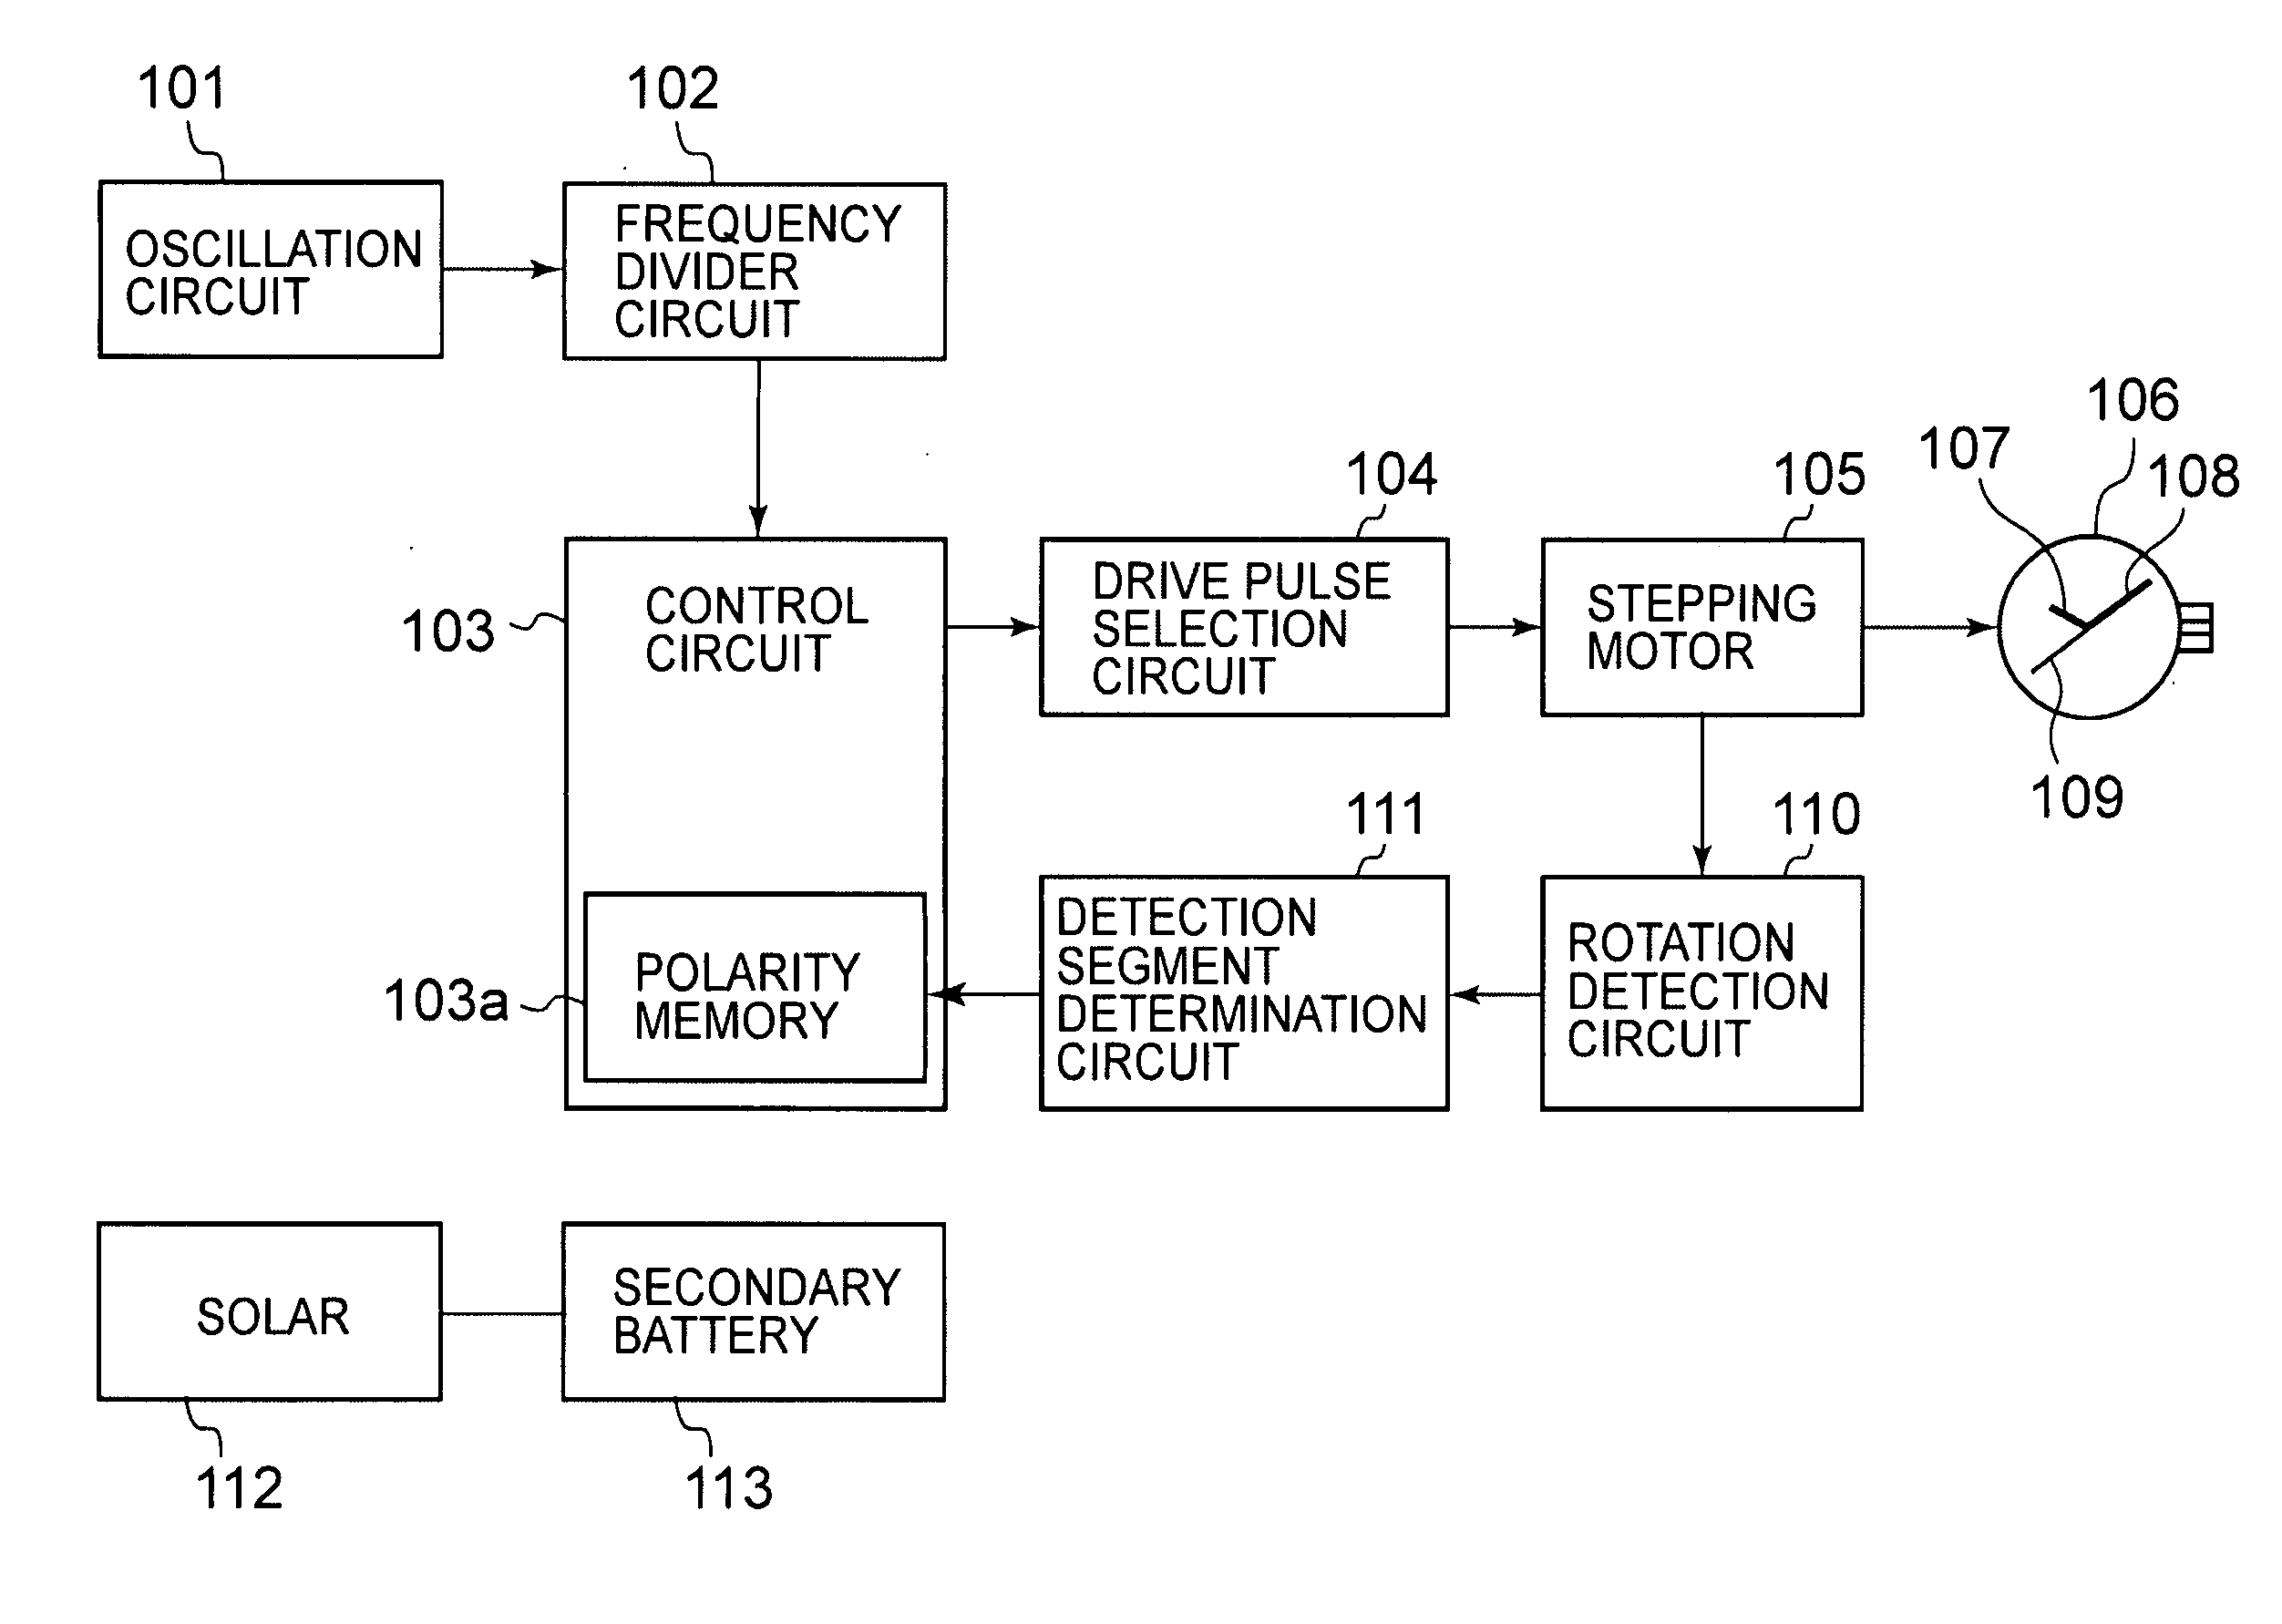 Stepping motor control circuit and analogue electronic watch